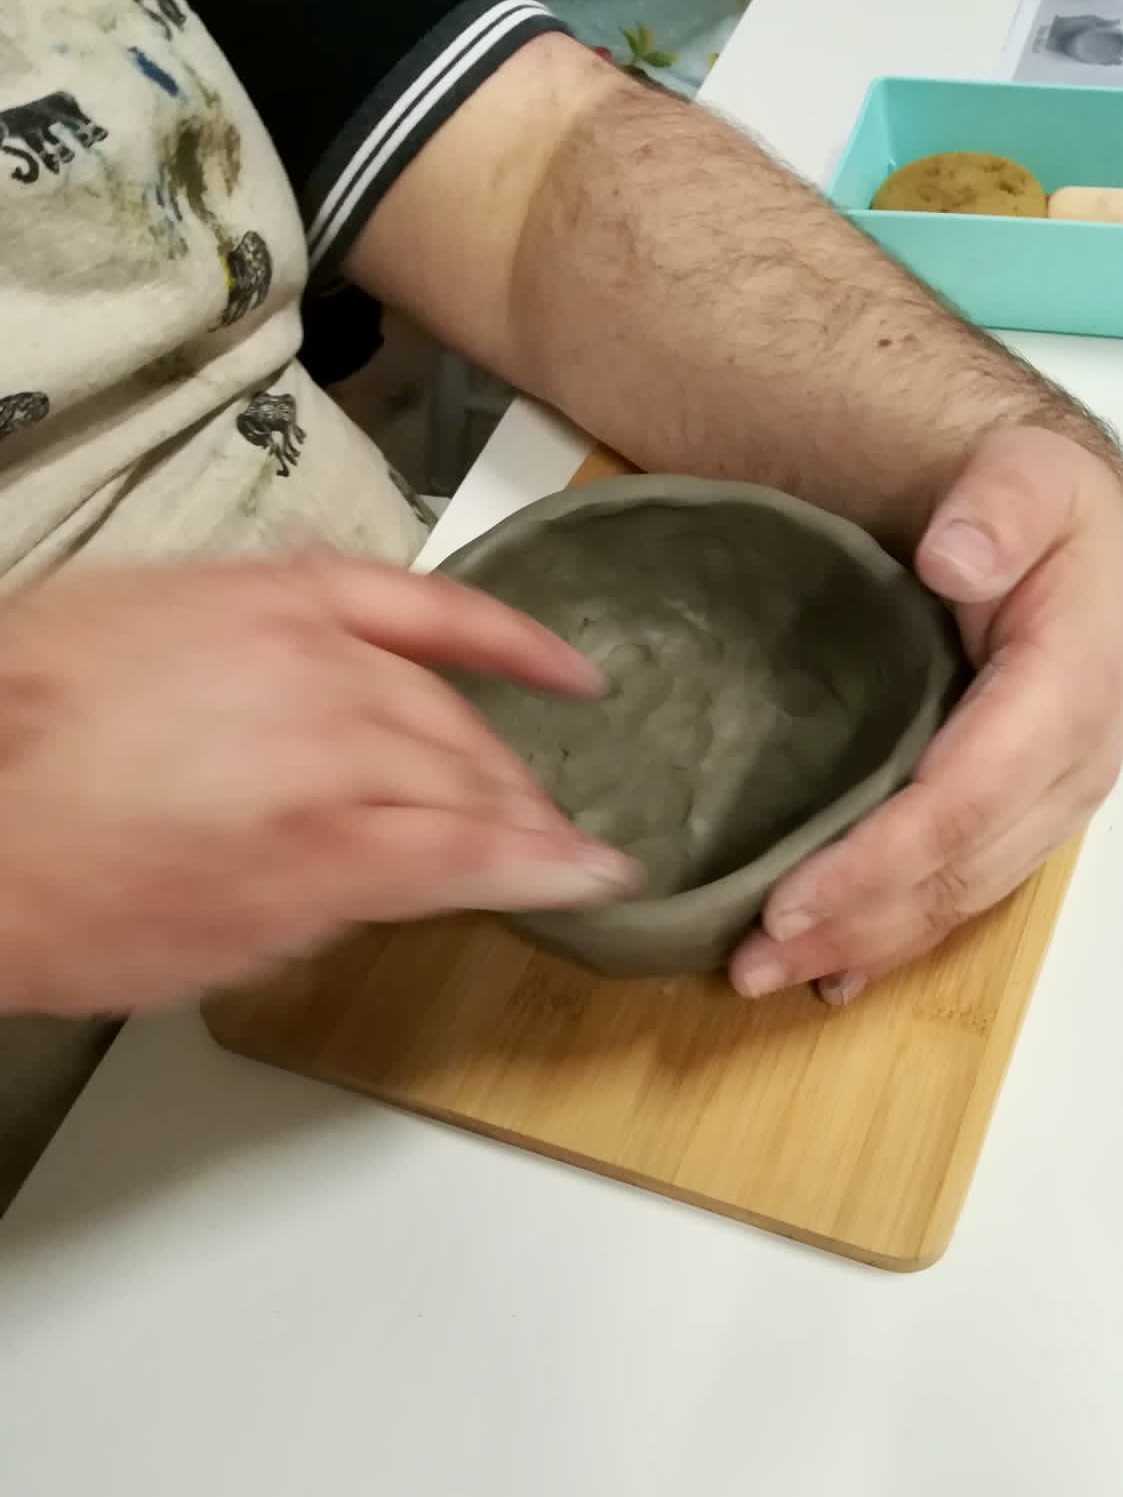 Adult beginner evening classes: "Have Fun With Clay"